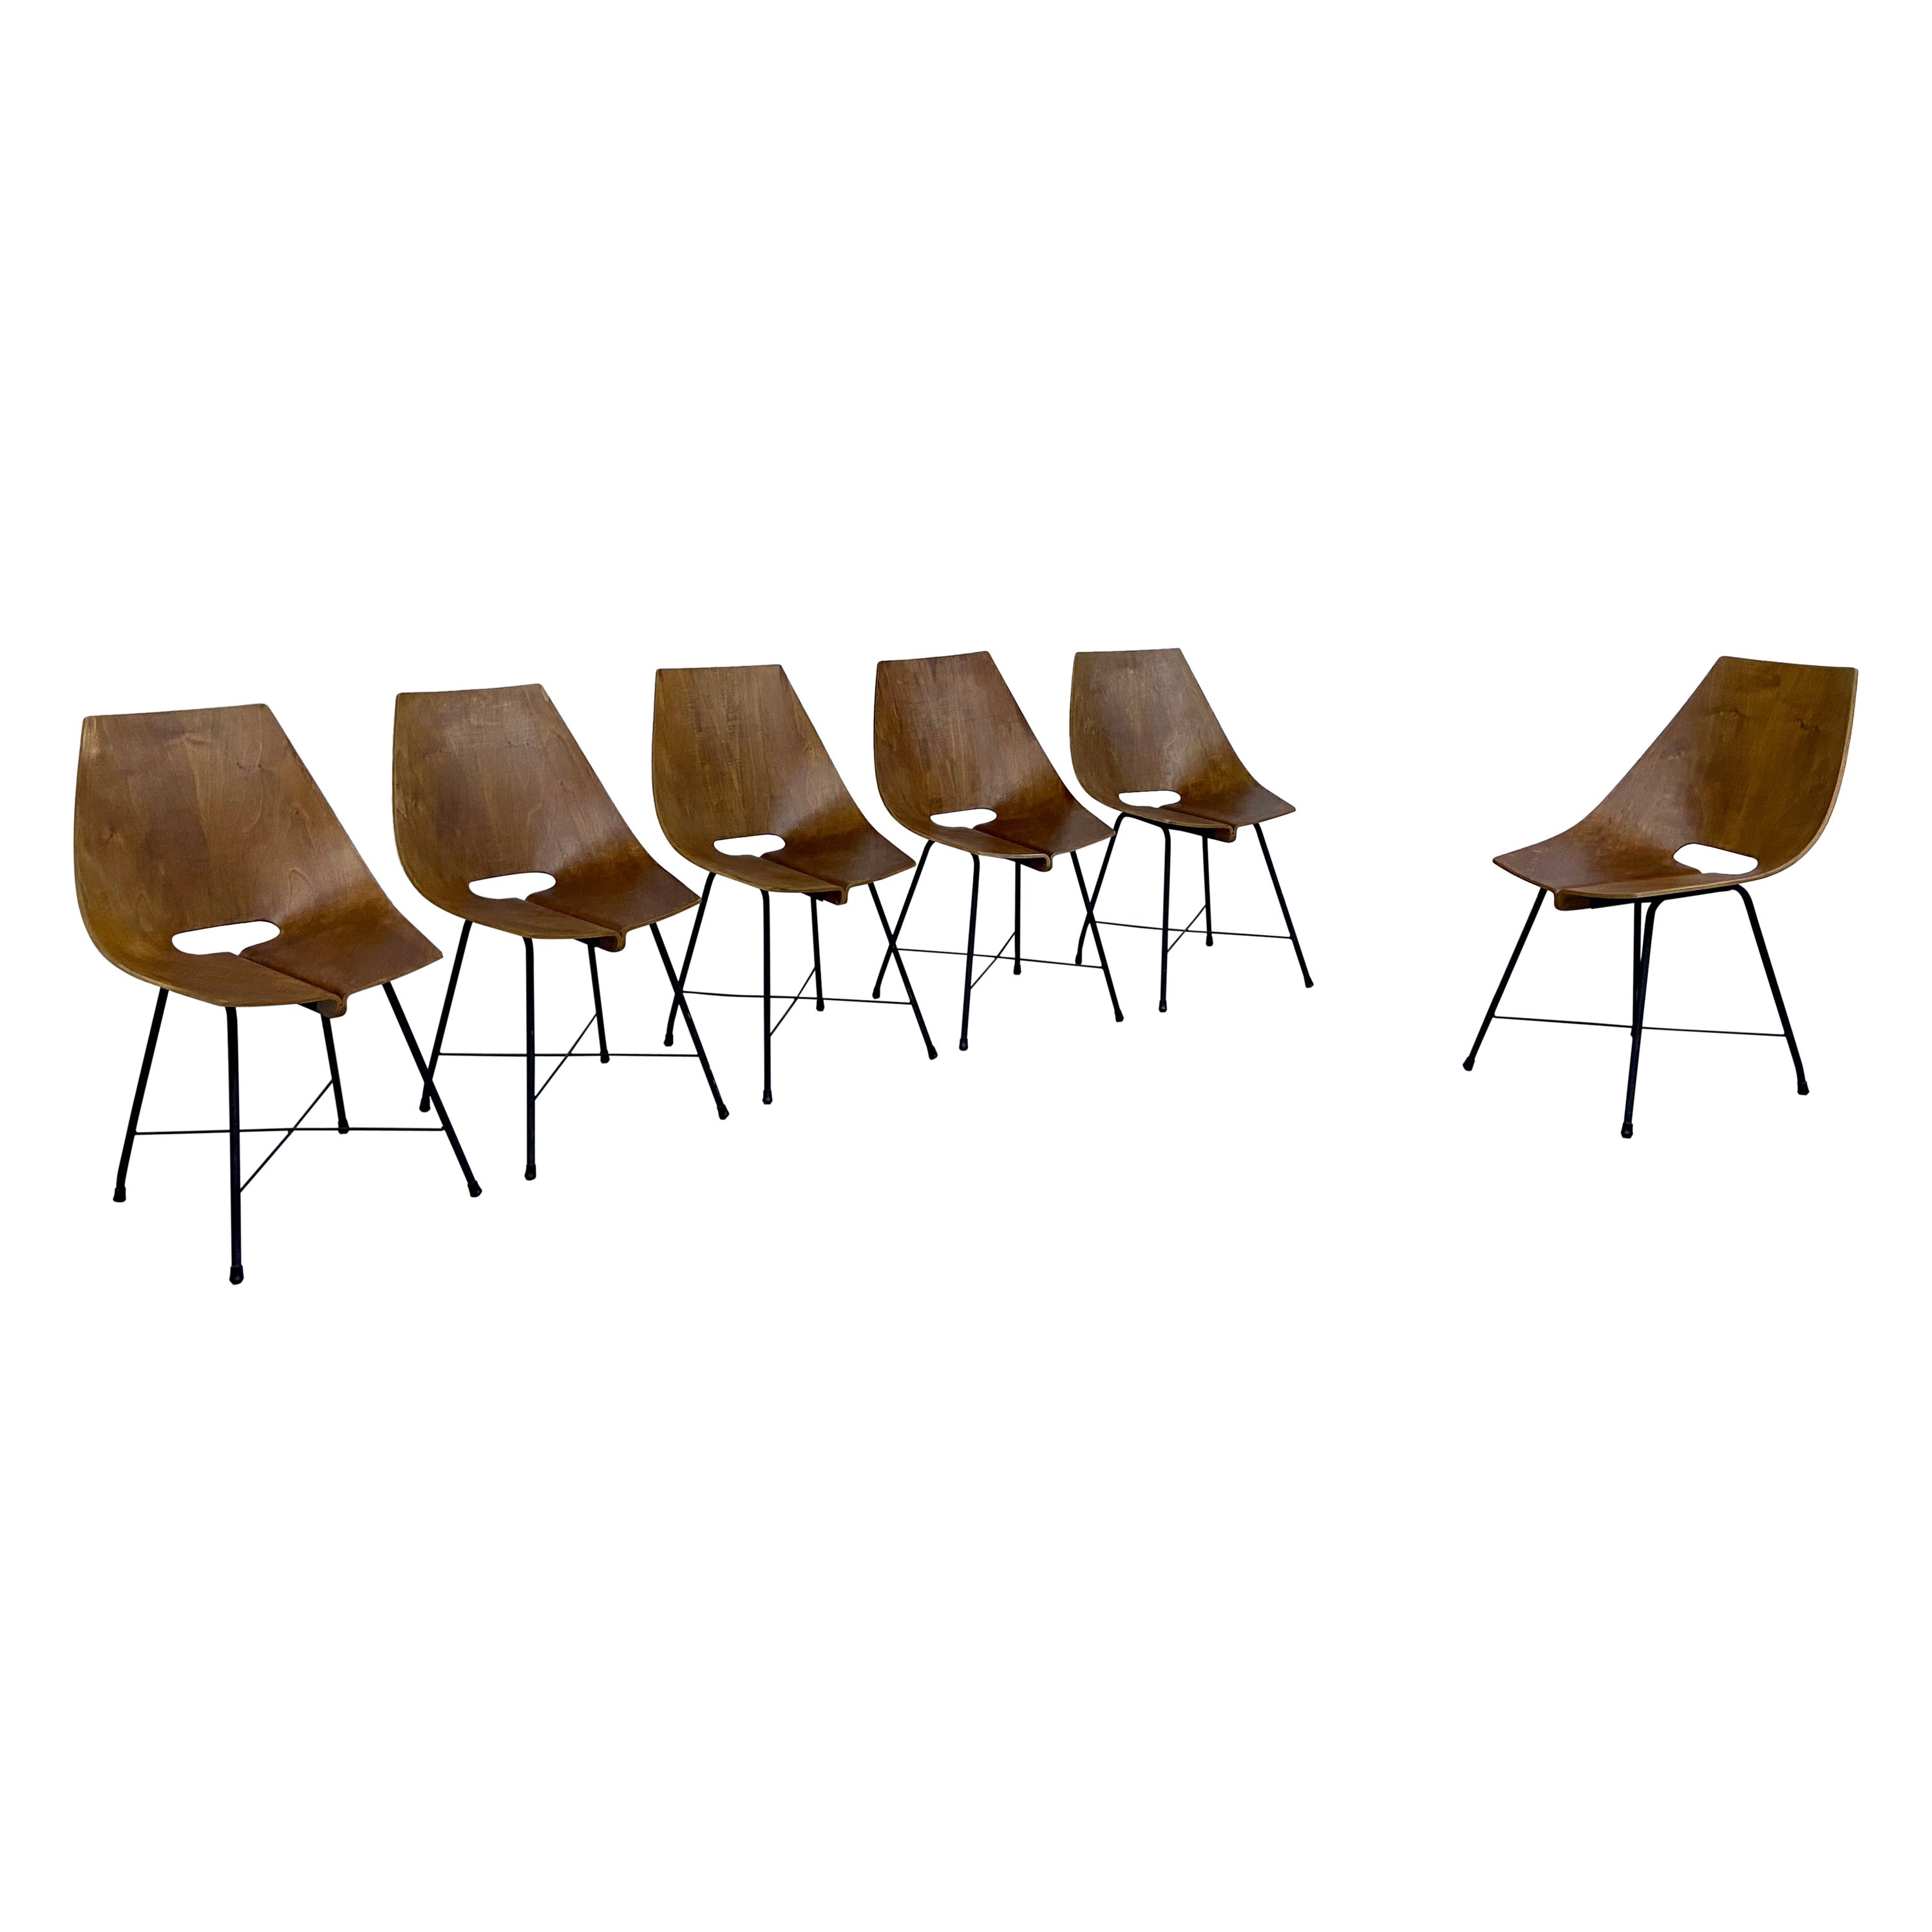 Set of 6 Dining Room Chairs by Carlo Ratti in Bended Wood and Metal, Italy, 1954 For Sale